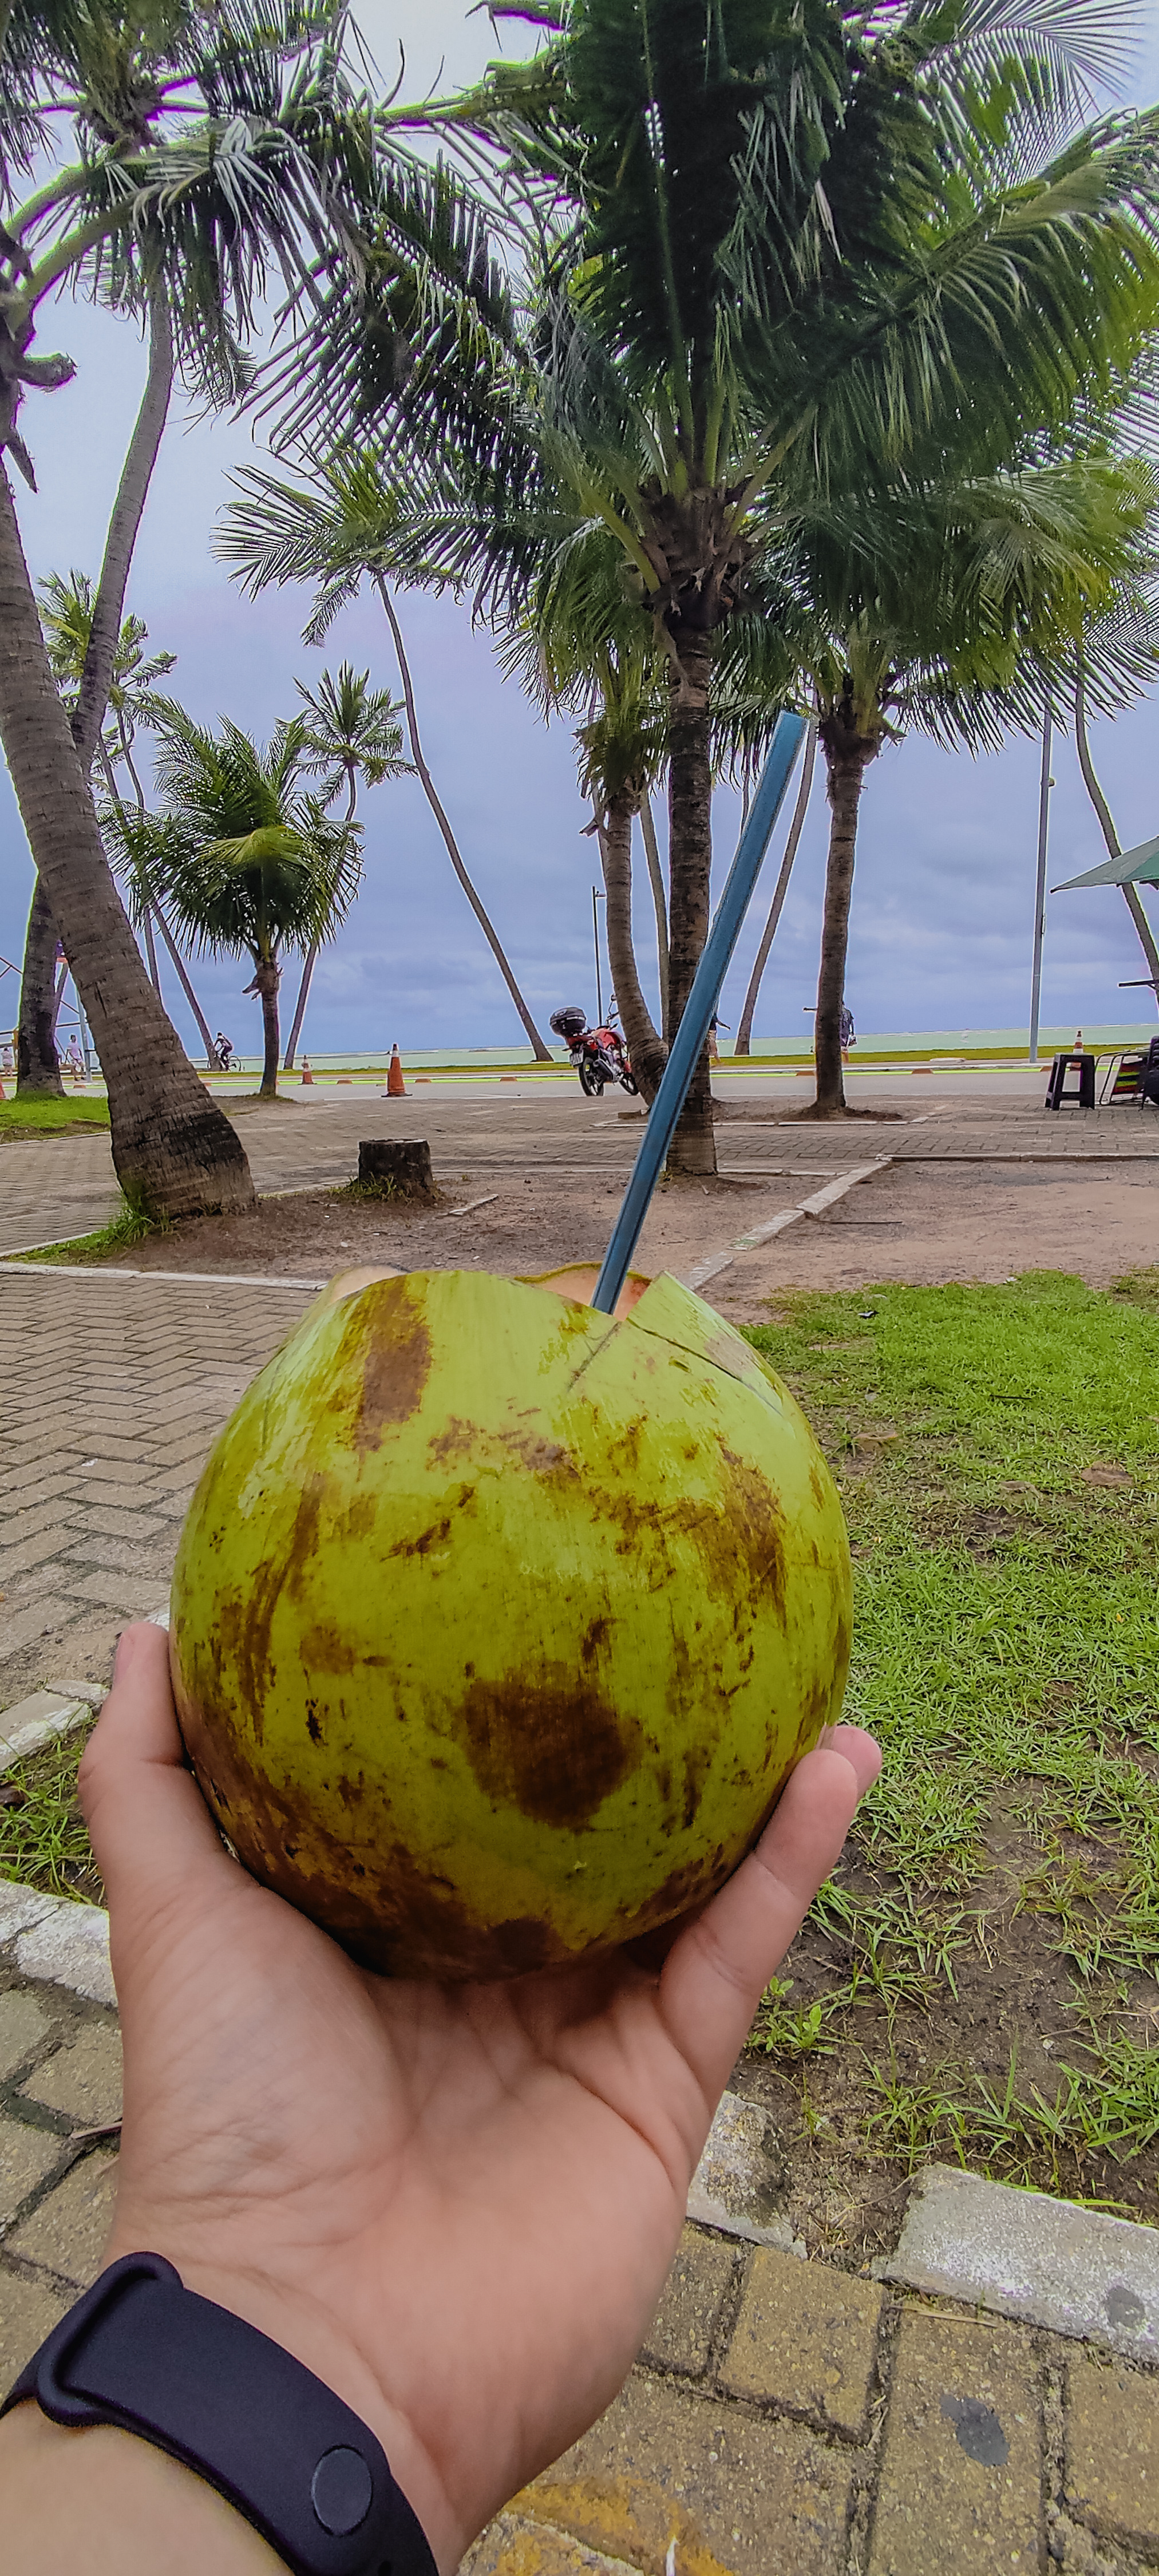 Person holding a coconut with palm trees and a beachfront walkway in the background